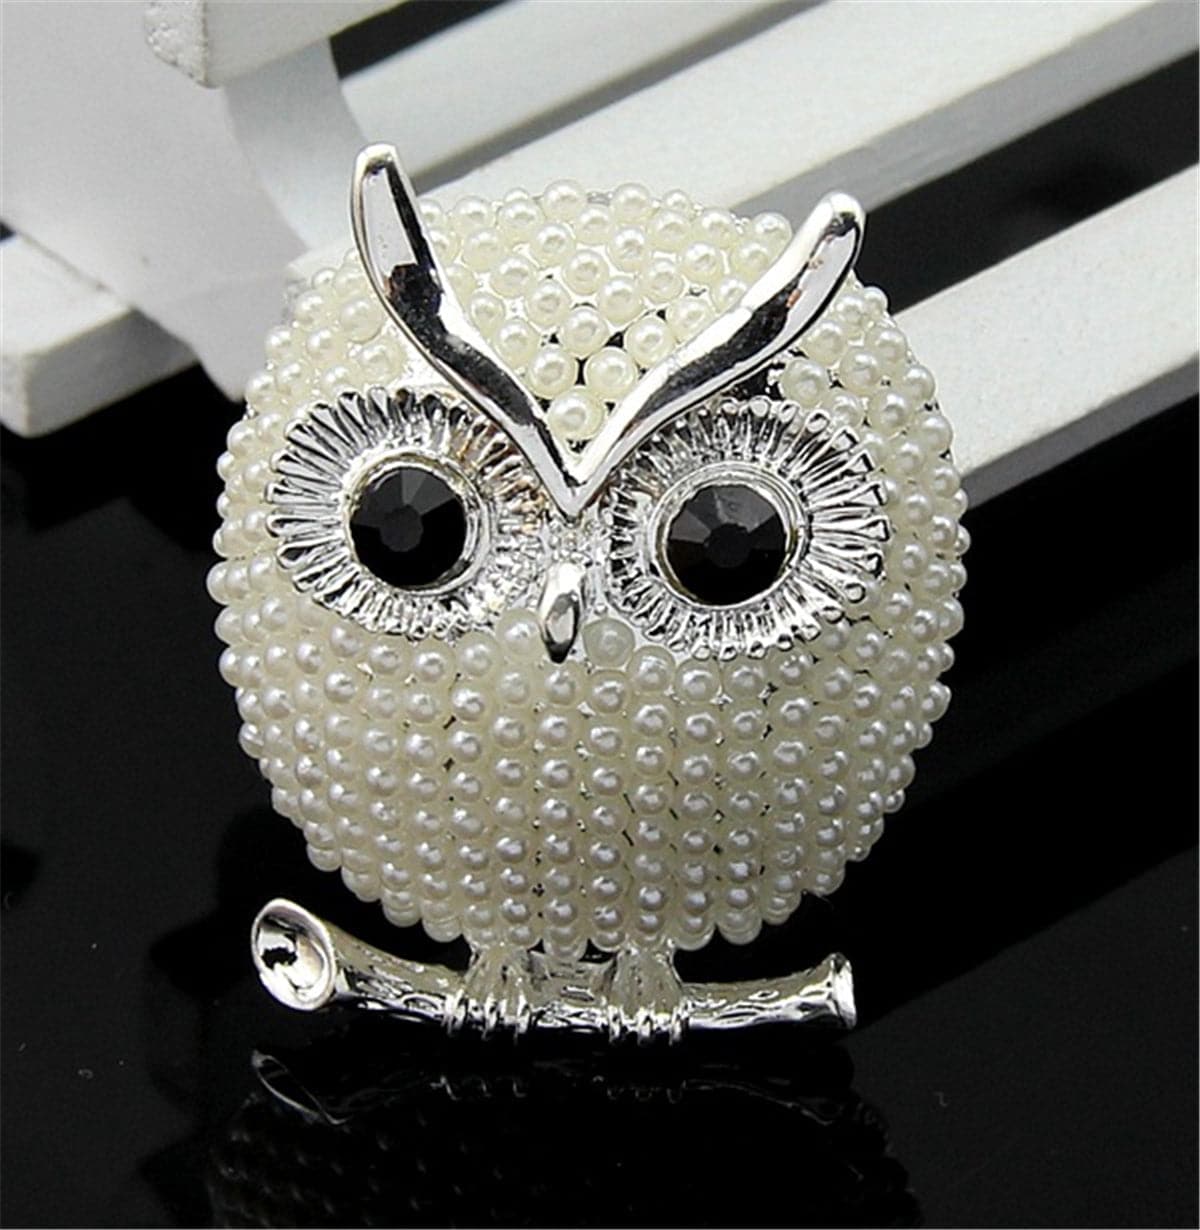 Cubic Zirconia & Silver-Plated Owl Brooch